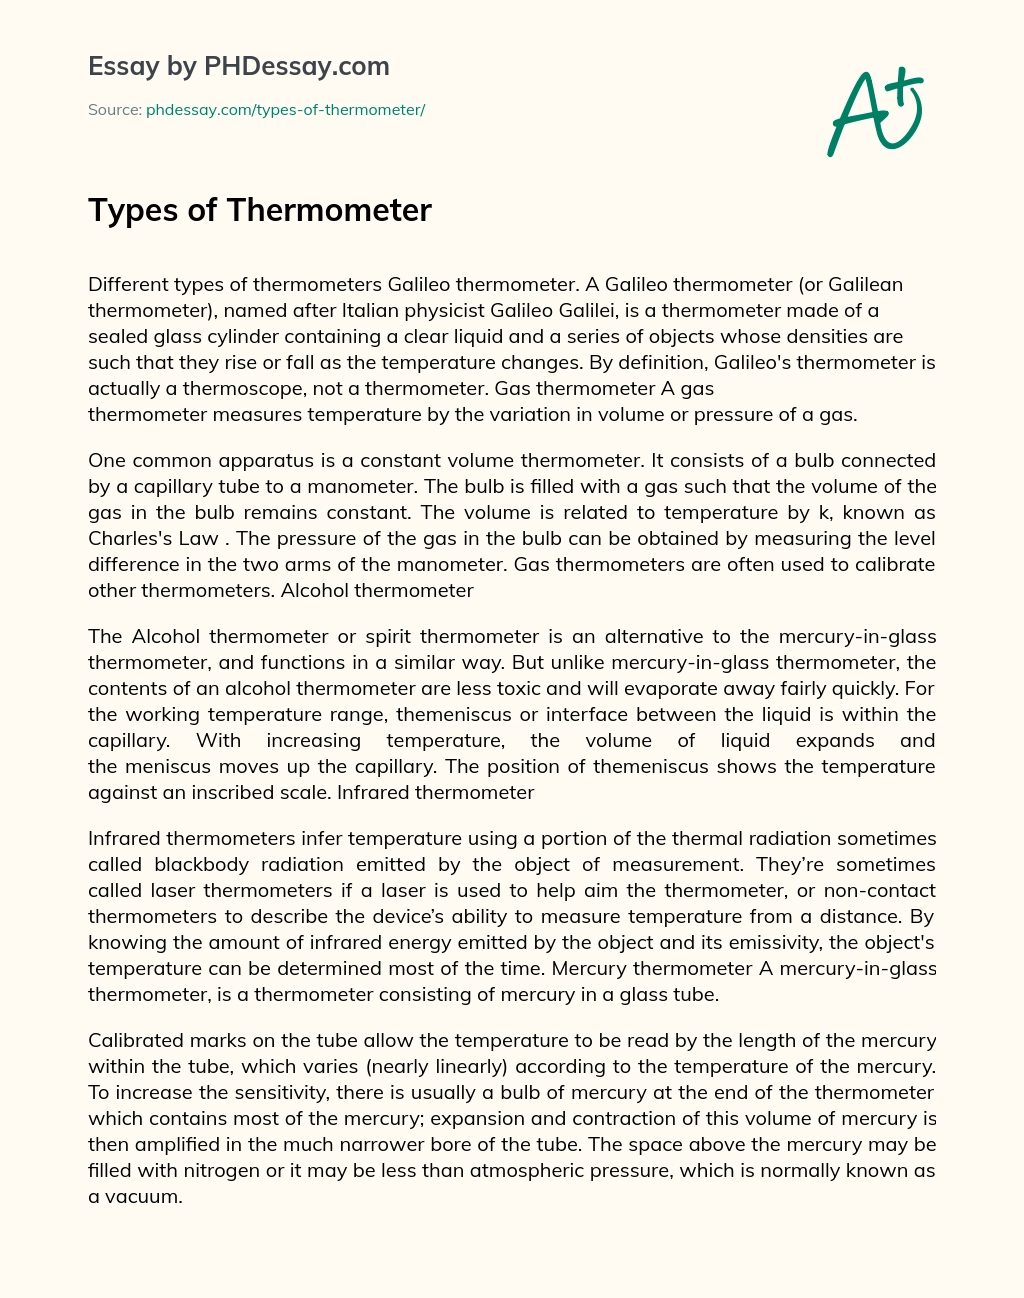 Types of Thermometer essay